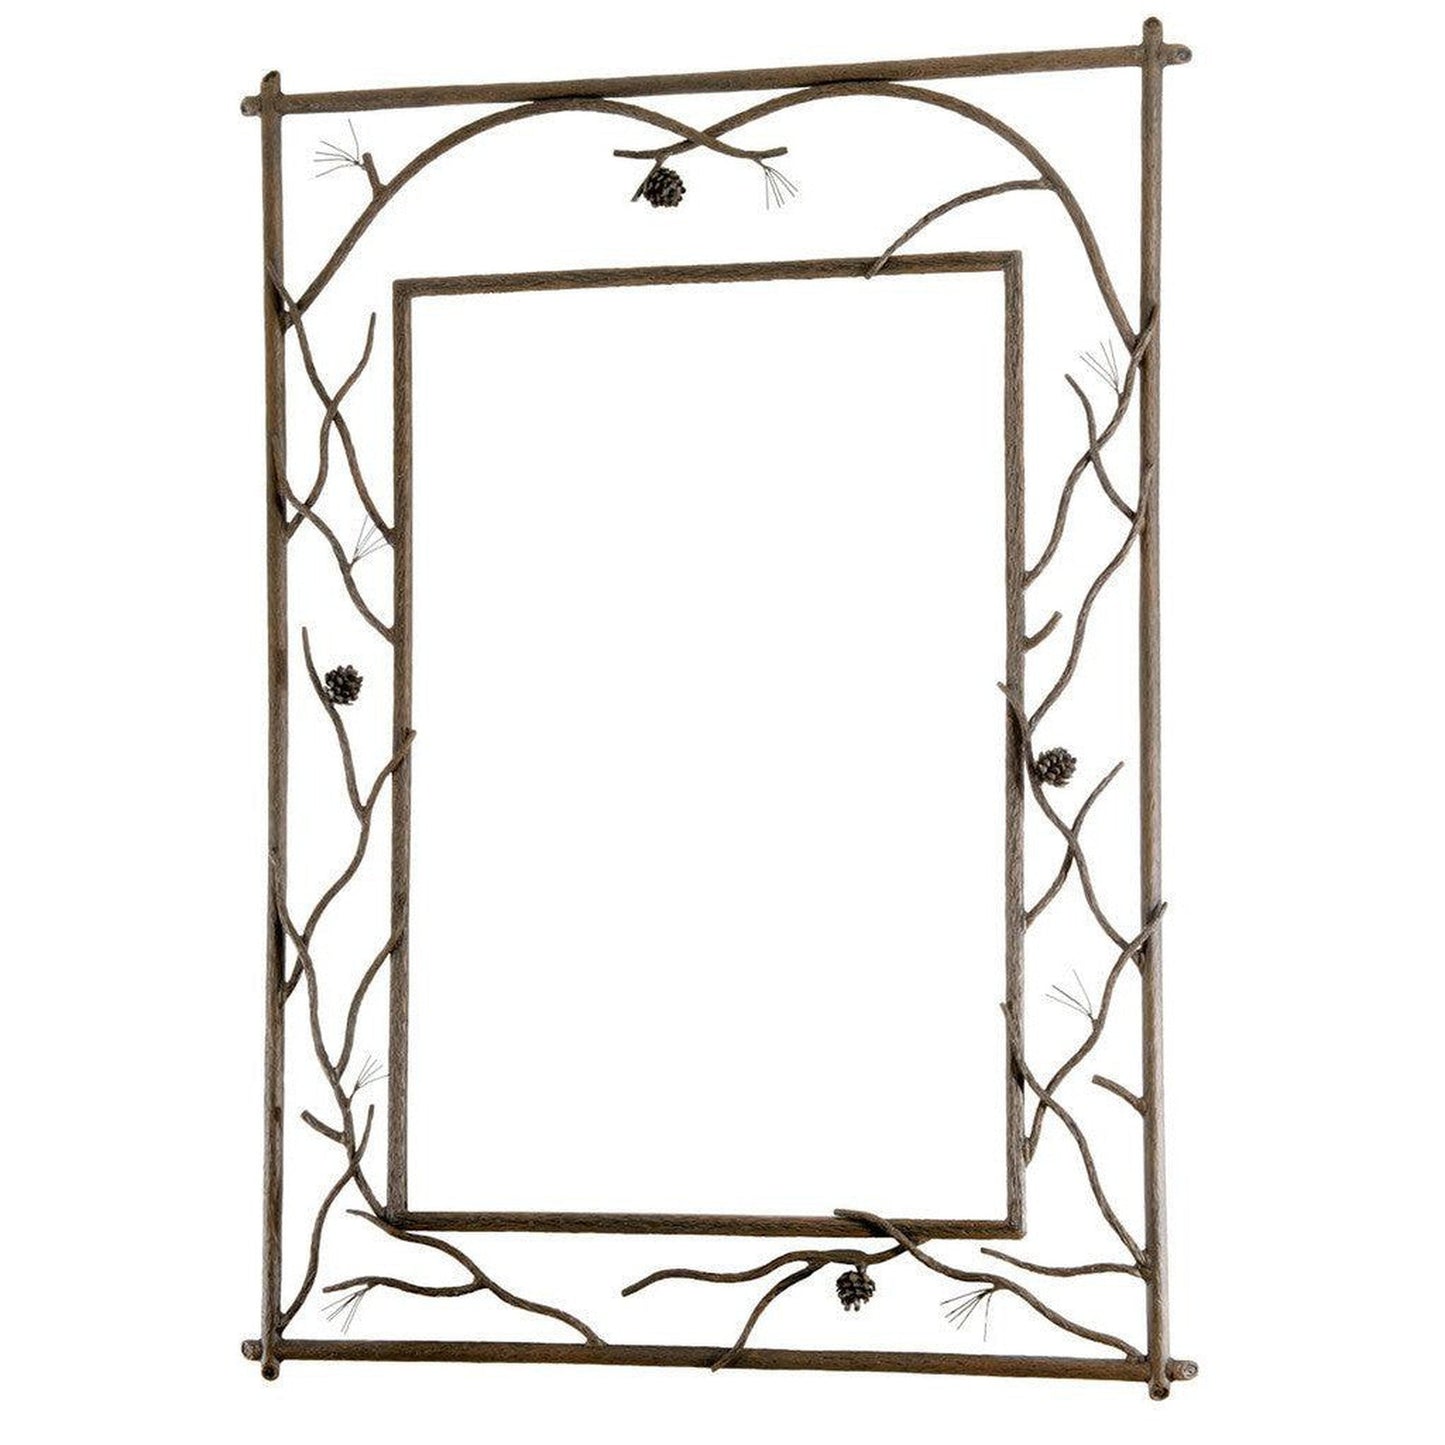 Stone County Ironworks Pine 29" x 35" Small Hand Rubbed Bronze Branched Iron Wall Mirror With Pewter Iron Accent